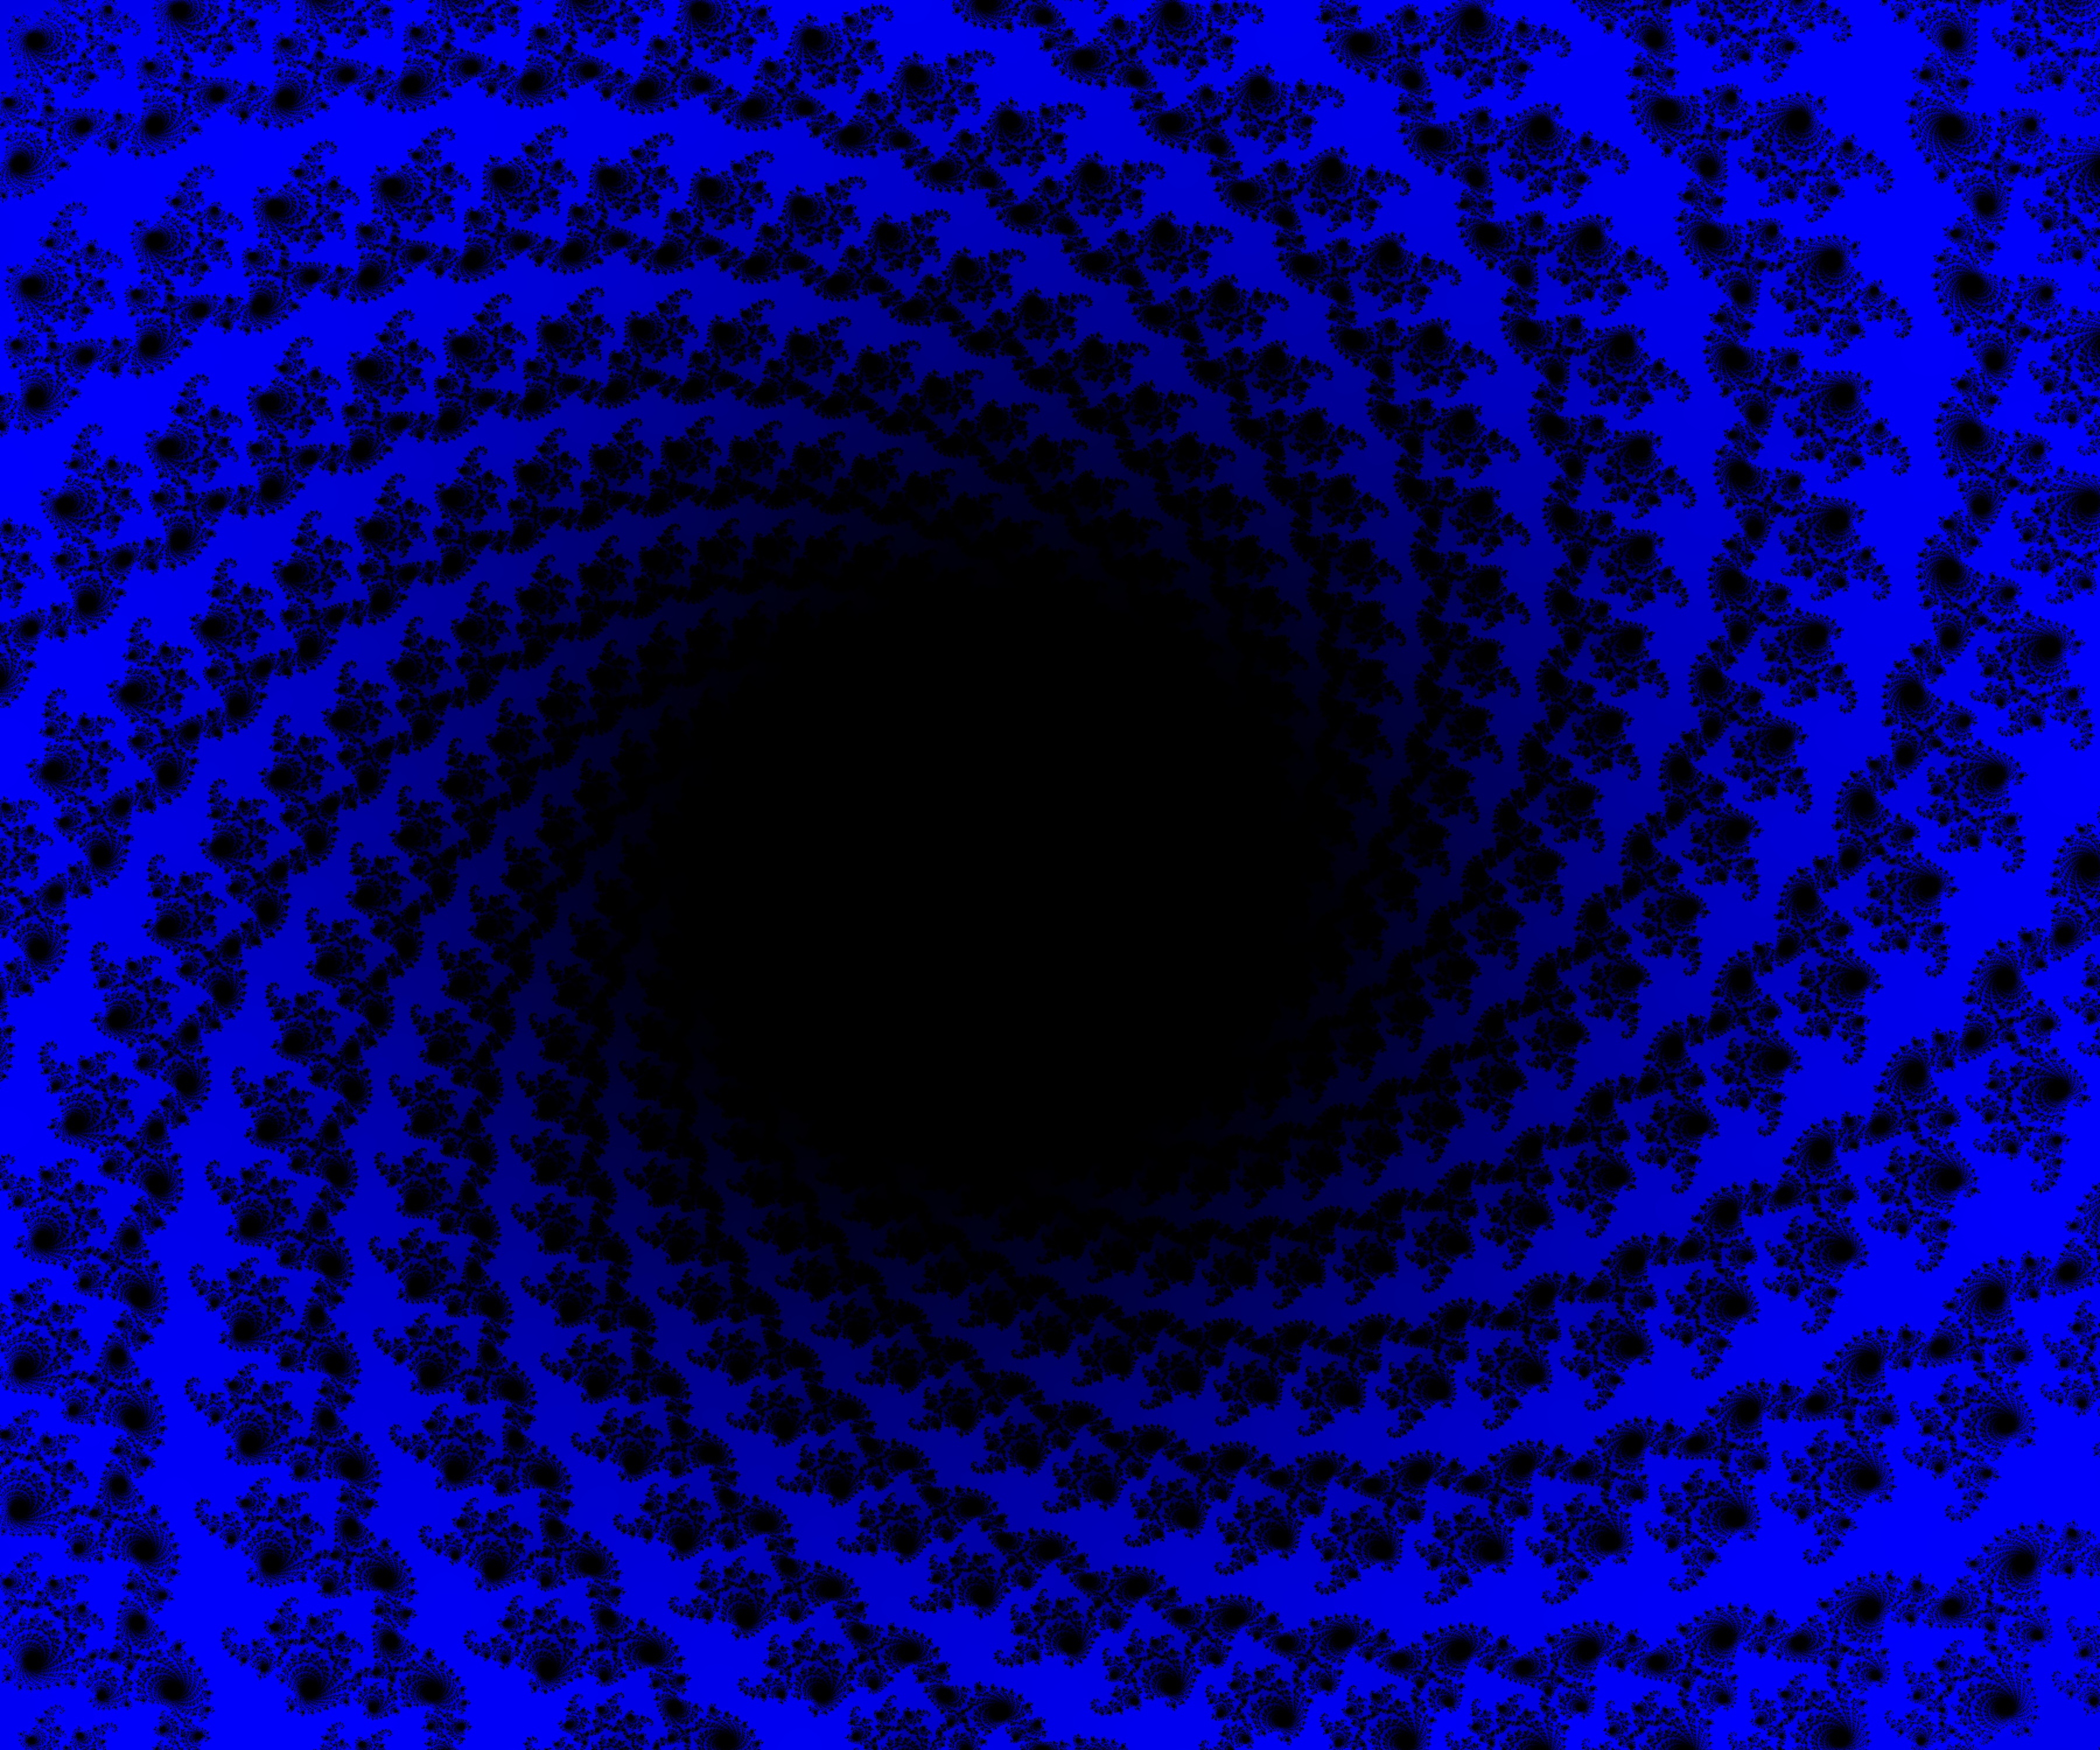 immersion, abstract, patterns, black, blue, rotation 1080p